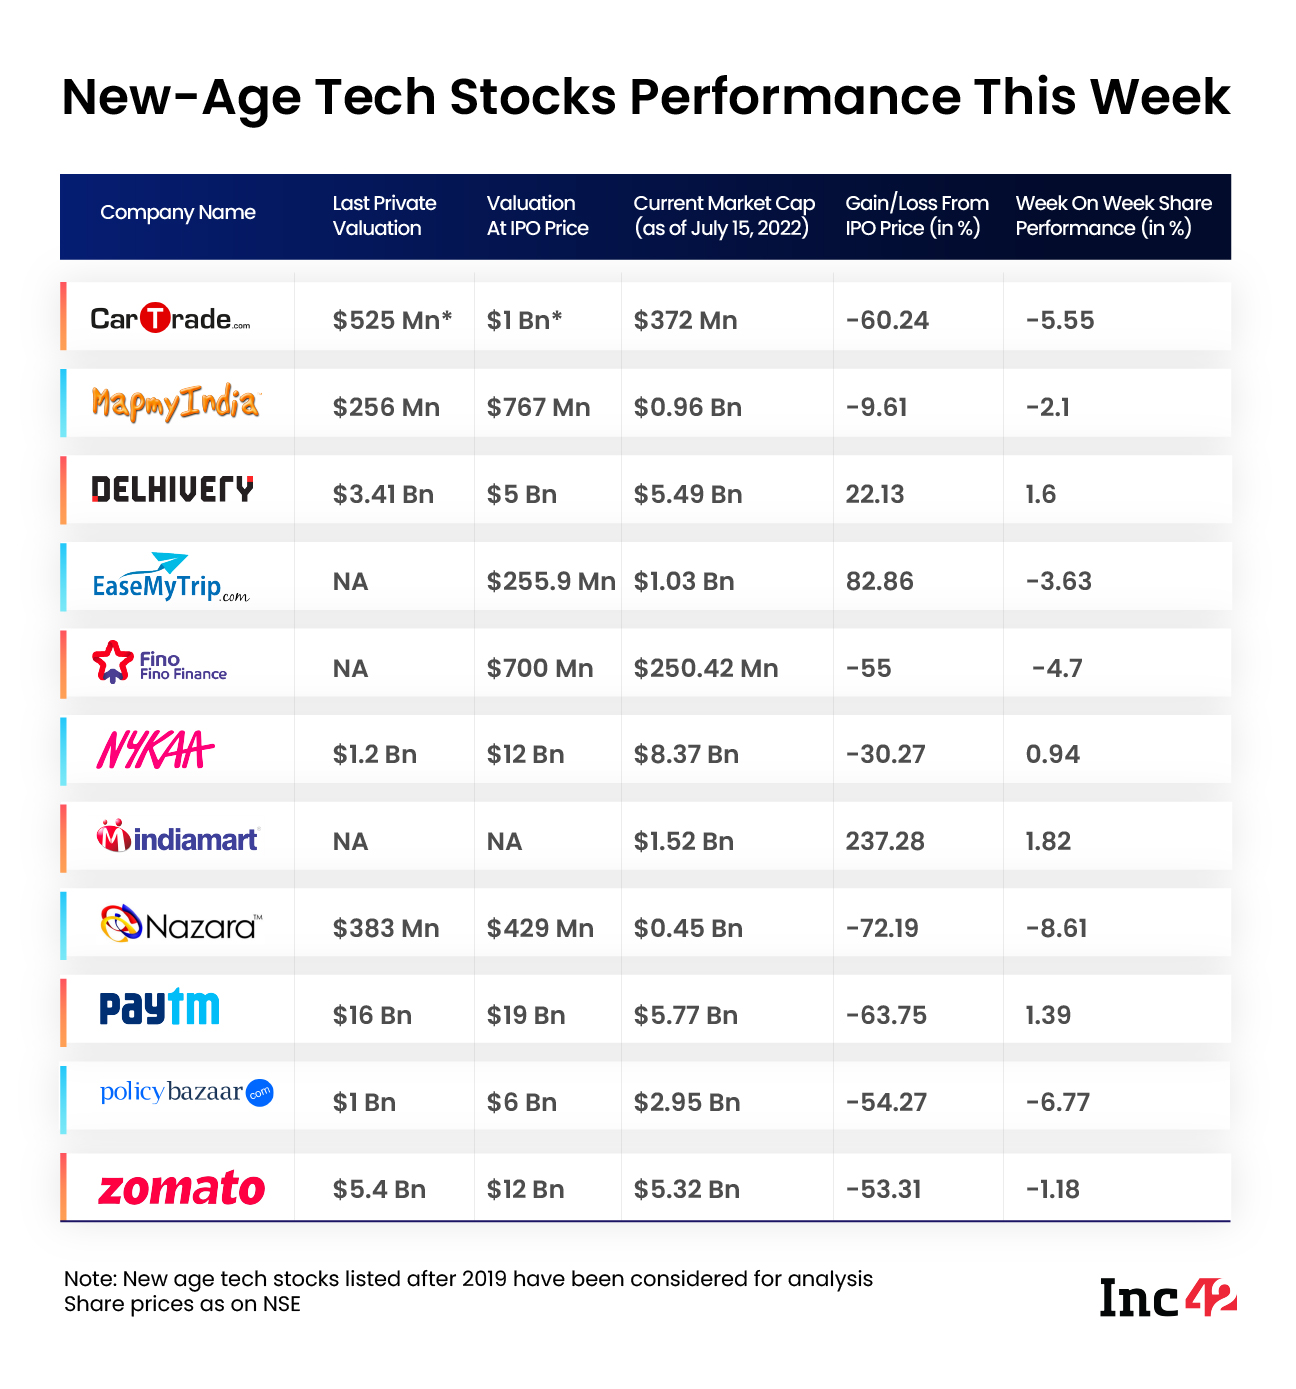 New age tech stocks performance this week